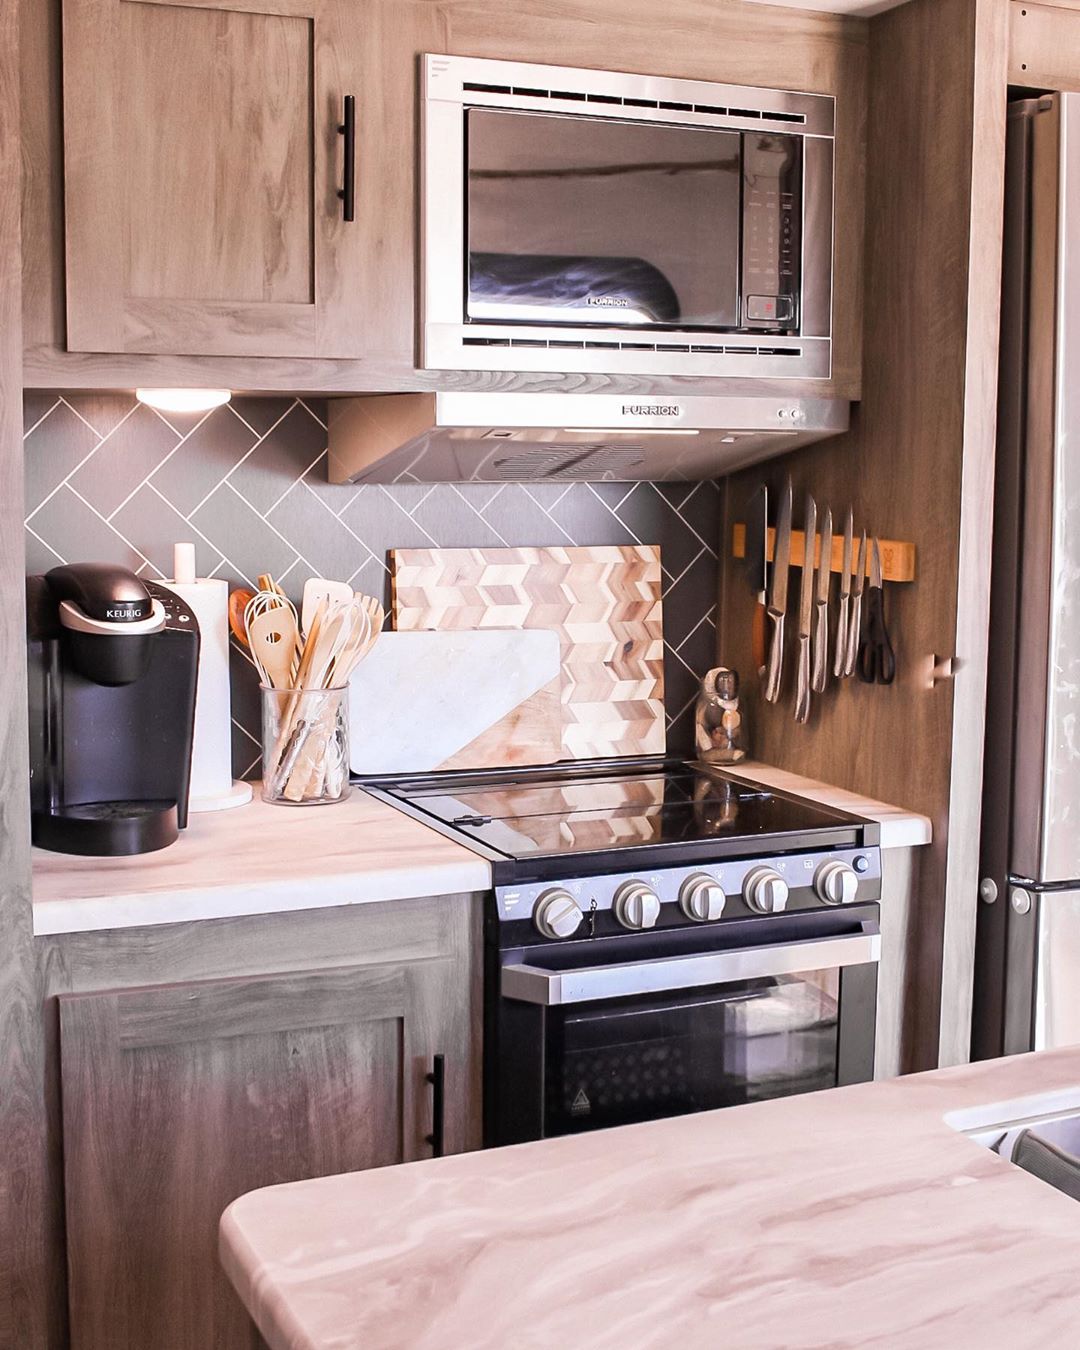 RV kitchen with updated backsplash and faux marble counter photo by Instagram user @laurencicileo